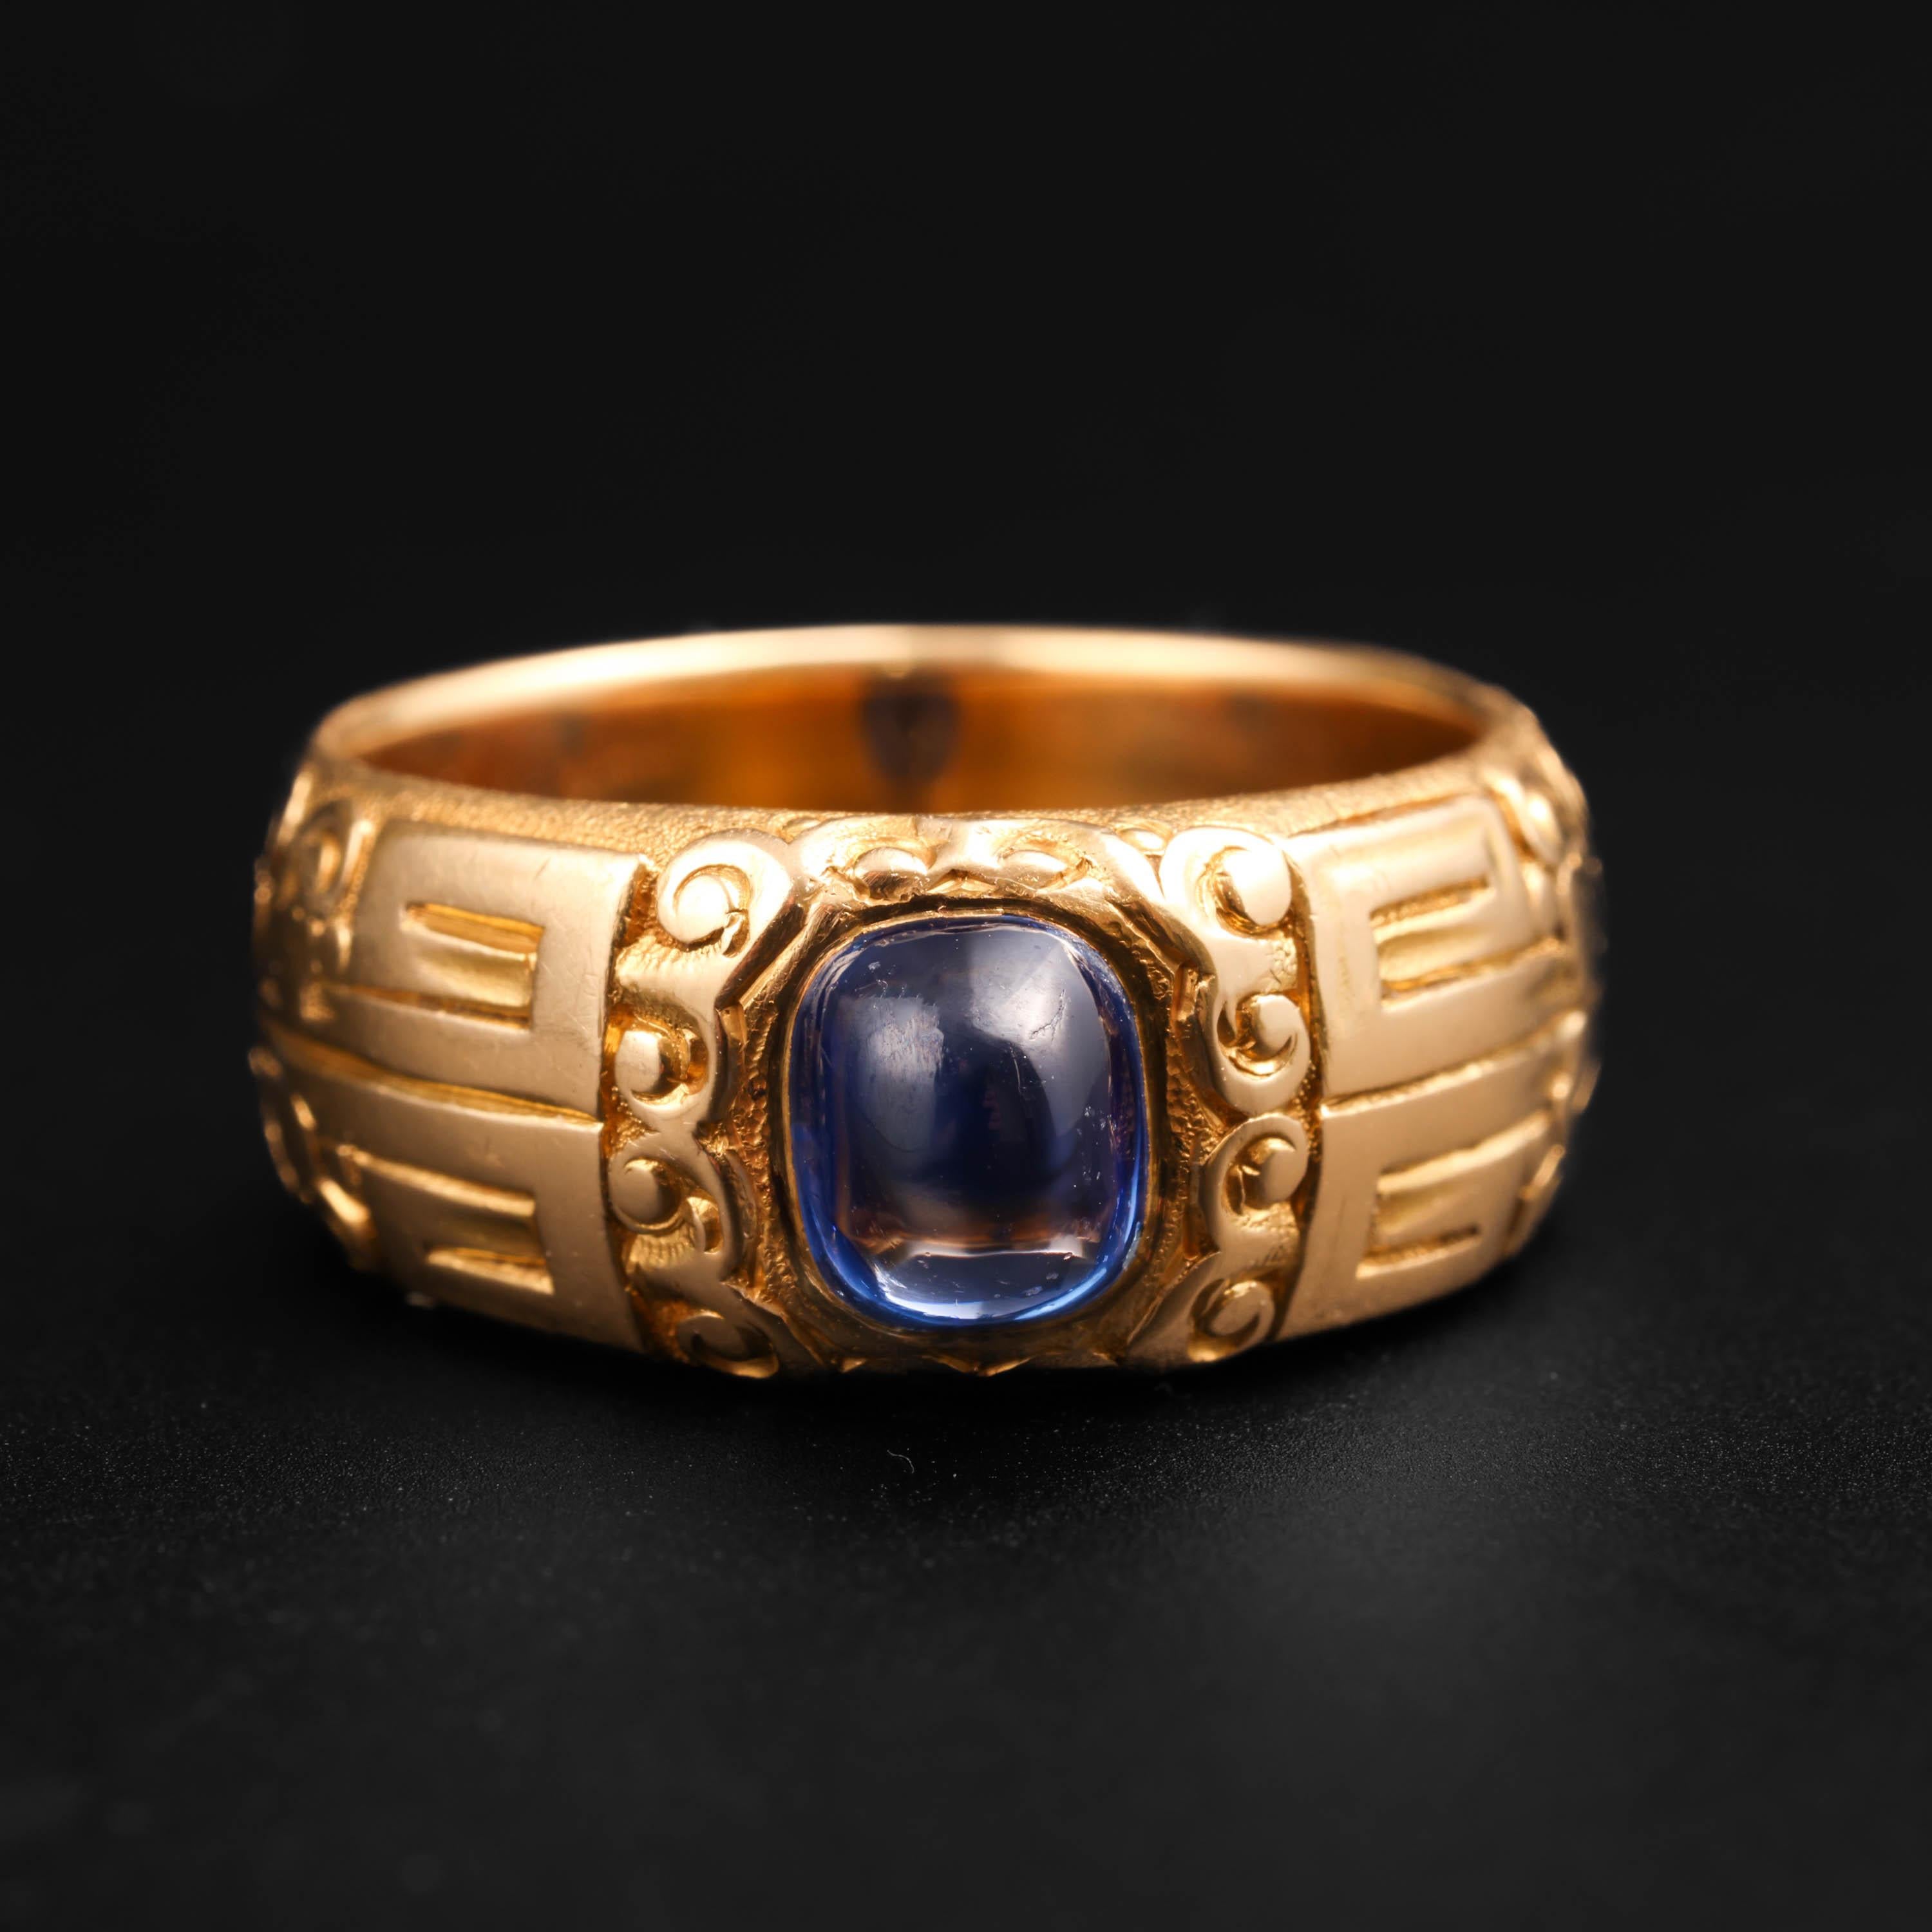 This important Kashmir sapphire ring is an original gilded-age Tiffany & Co. masterpiece. It features one of the rarest, most prized gemstones on earth: a Kashmir sapphire. 

The cornflower blue pyramidal cabochon has been certified by the AGL,